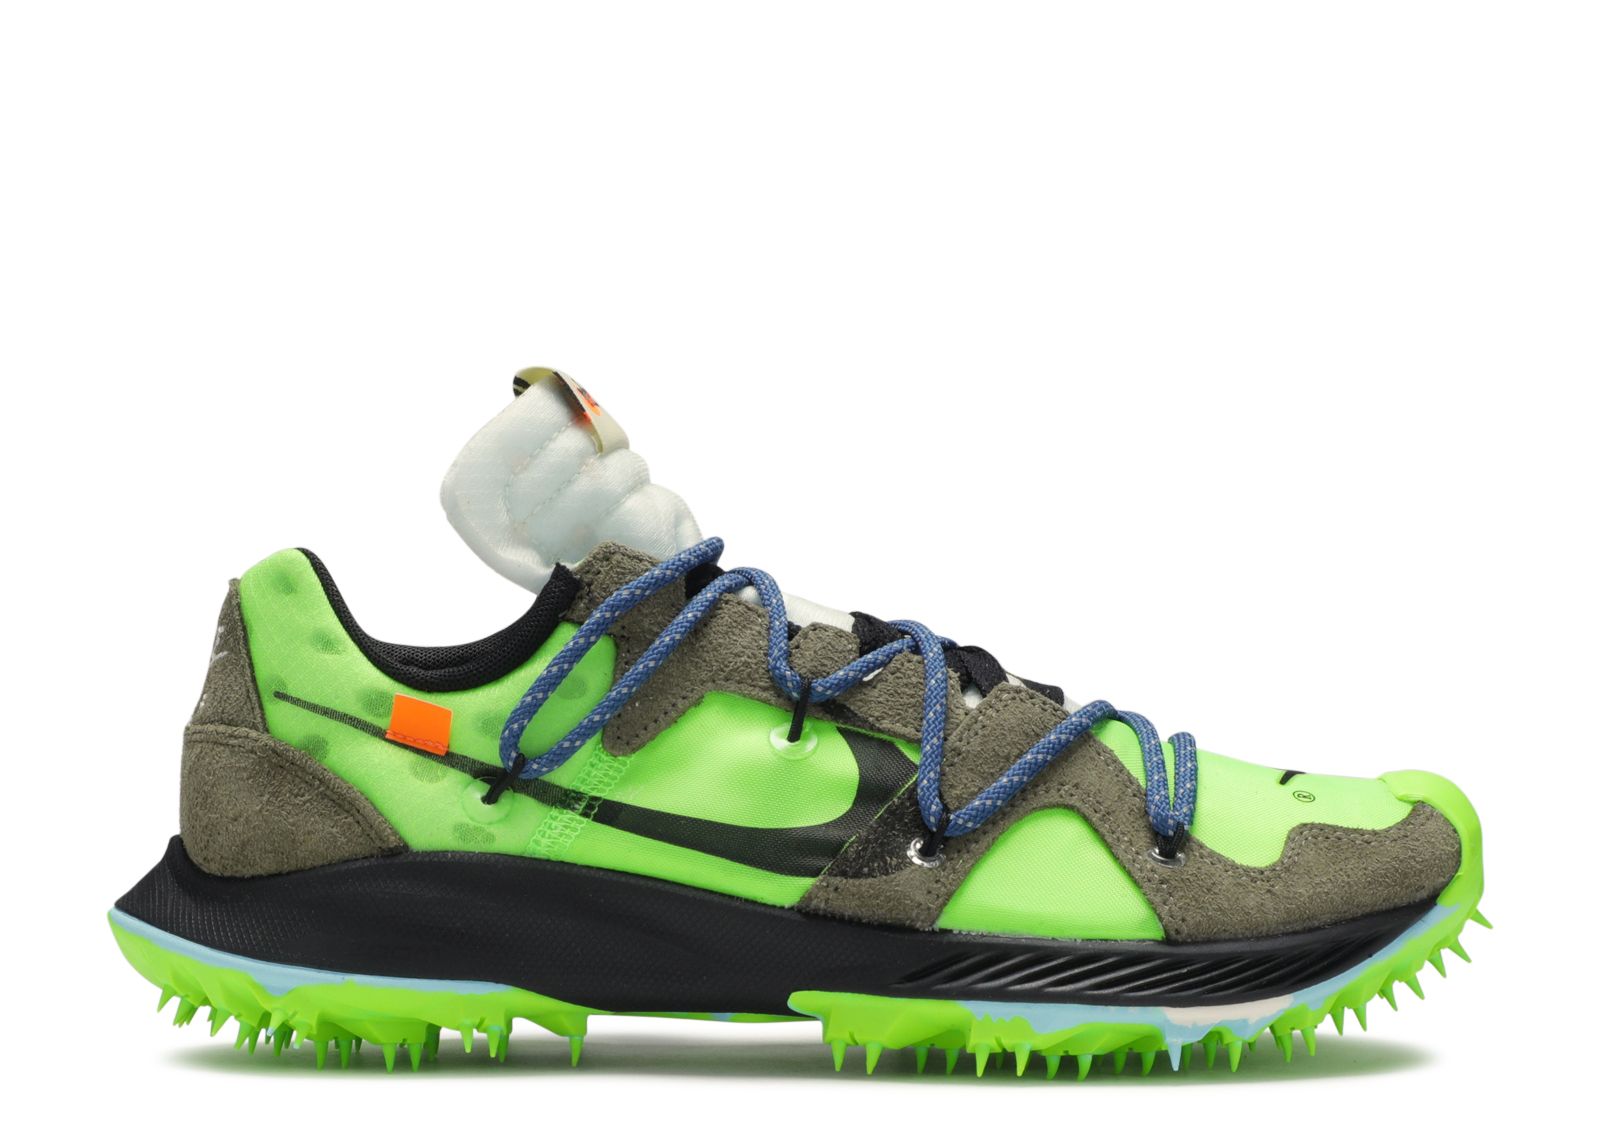 Кроссовки Nike Off-White X Wmns Air Zoom Terra Kiger 5 'Athlete In Progress - Electric Green', зеленый кроссовки nike off white x wmns air zoom terra kiger 5 athlete in progress electric green зеленый